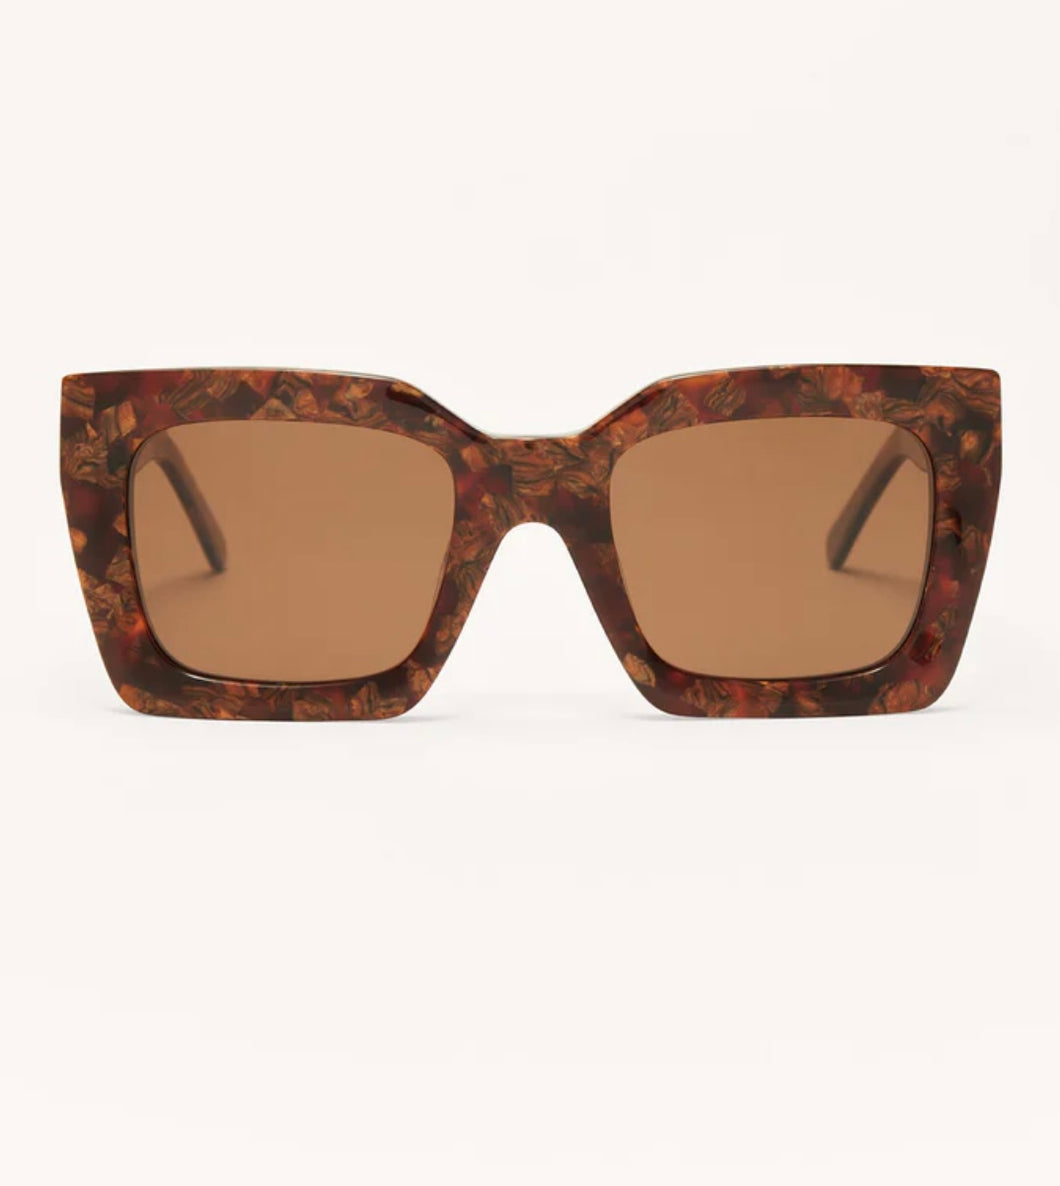 Z Supply: Early Riser Polarized Sunglasses in Brown Tortious